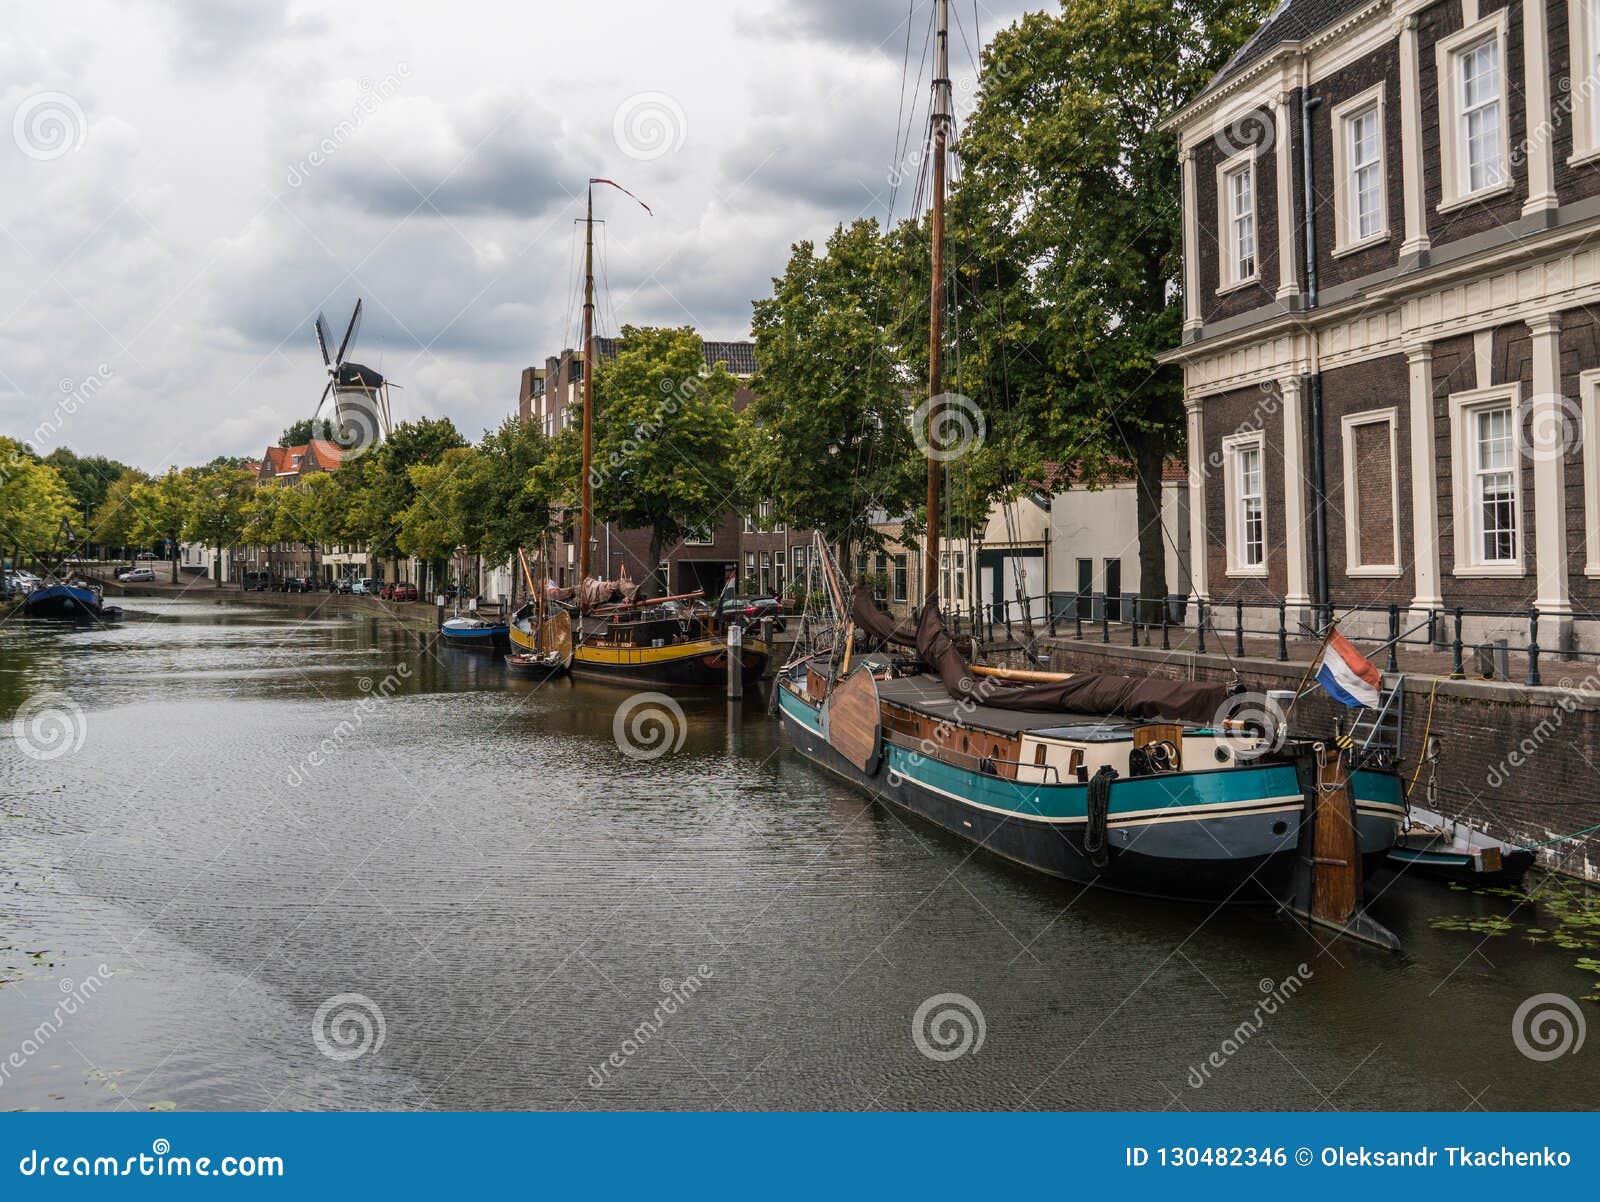 Traditional Wooden Sailing Ships In Water Channel Old Historic